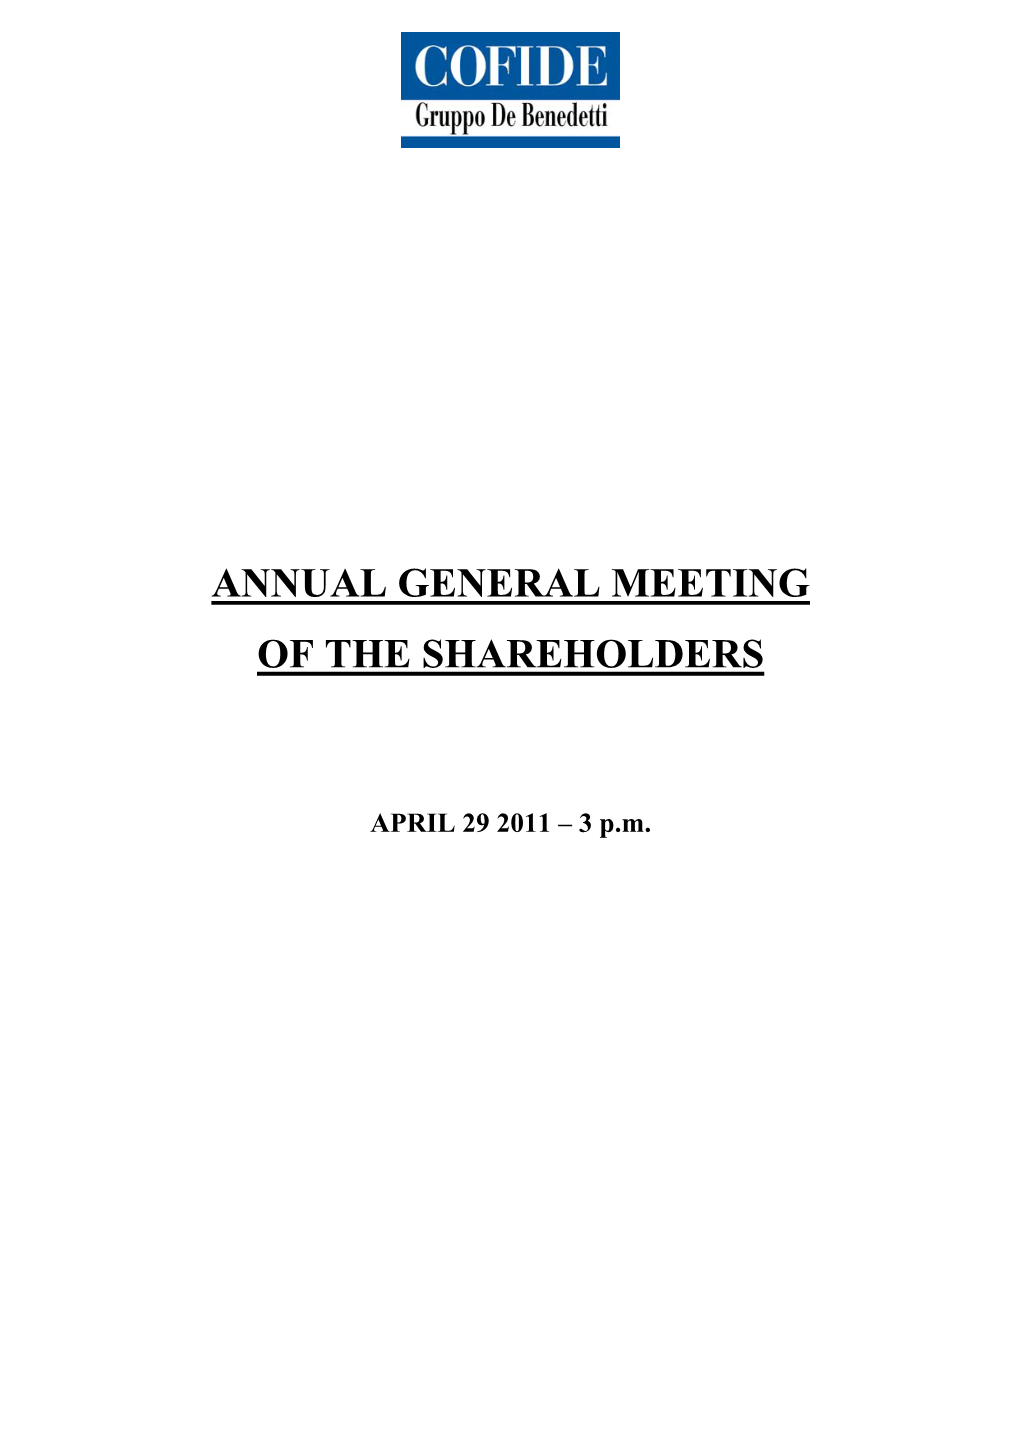 Annual General Meeting of the Shareholders